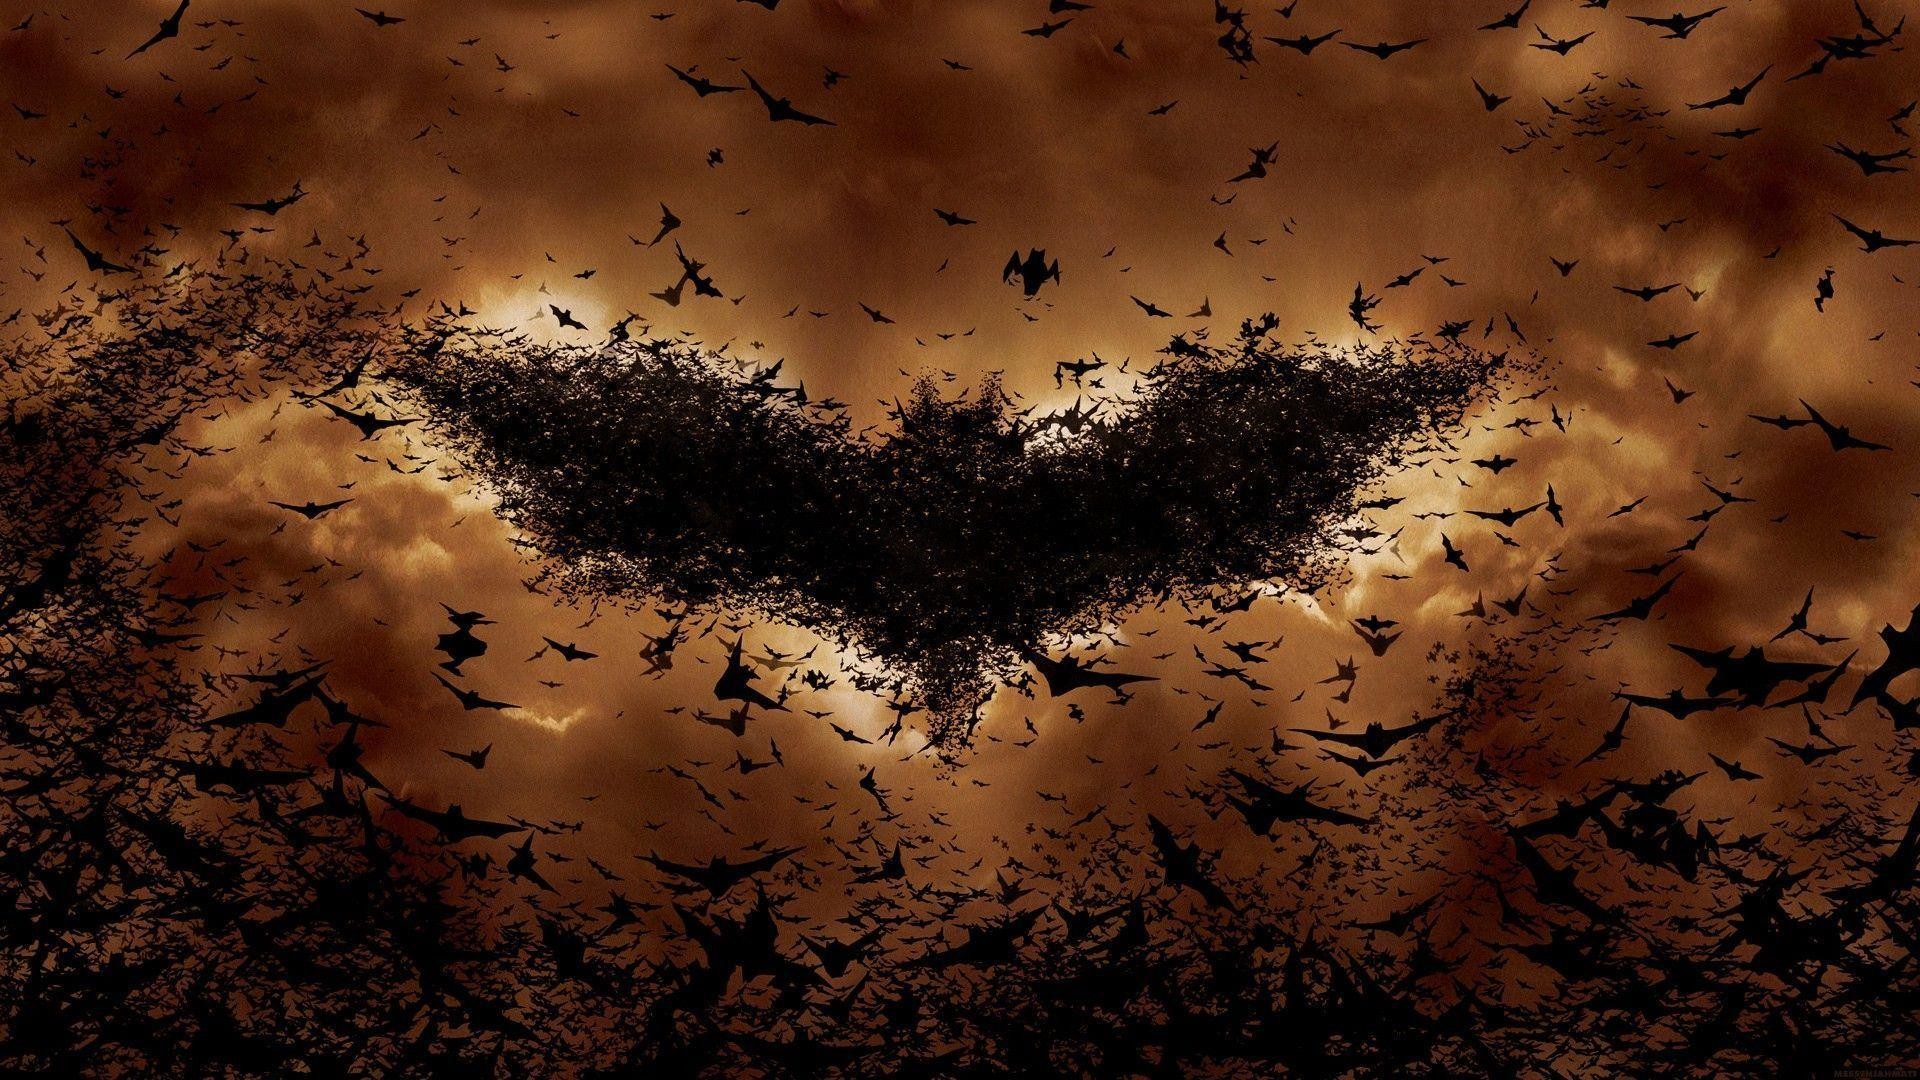 Bats wallpapers pictures